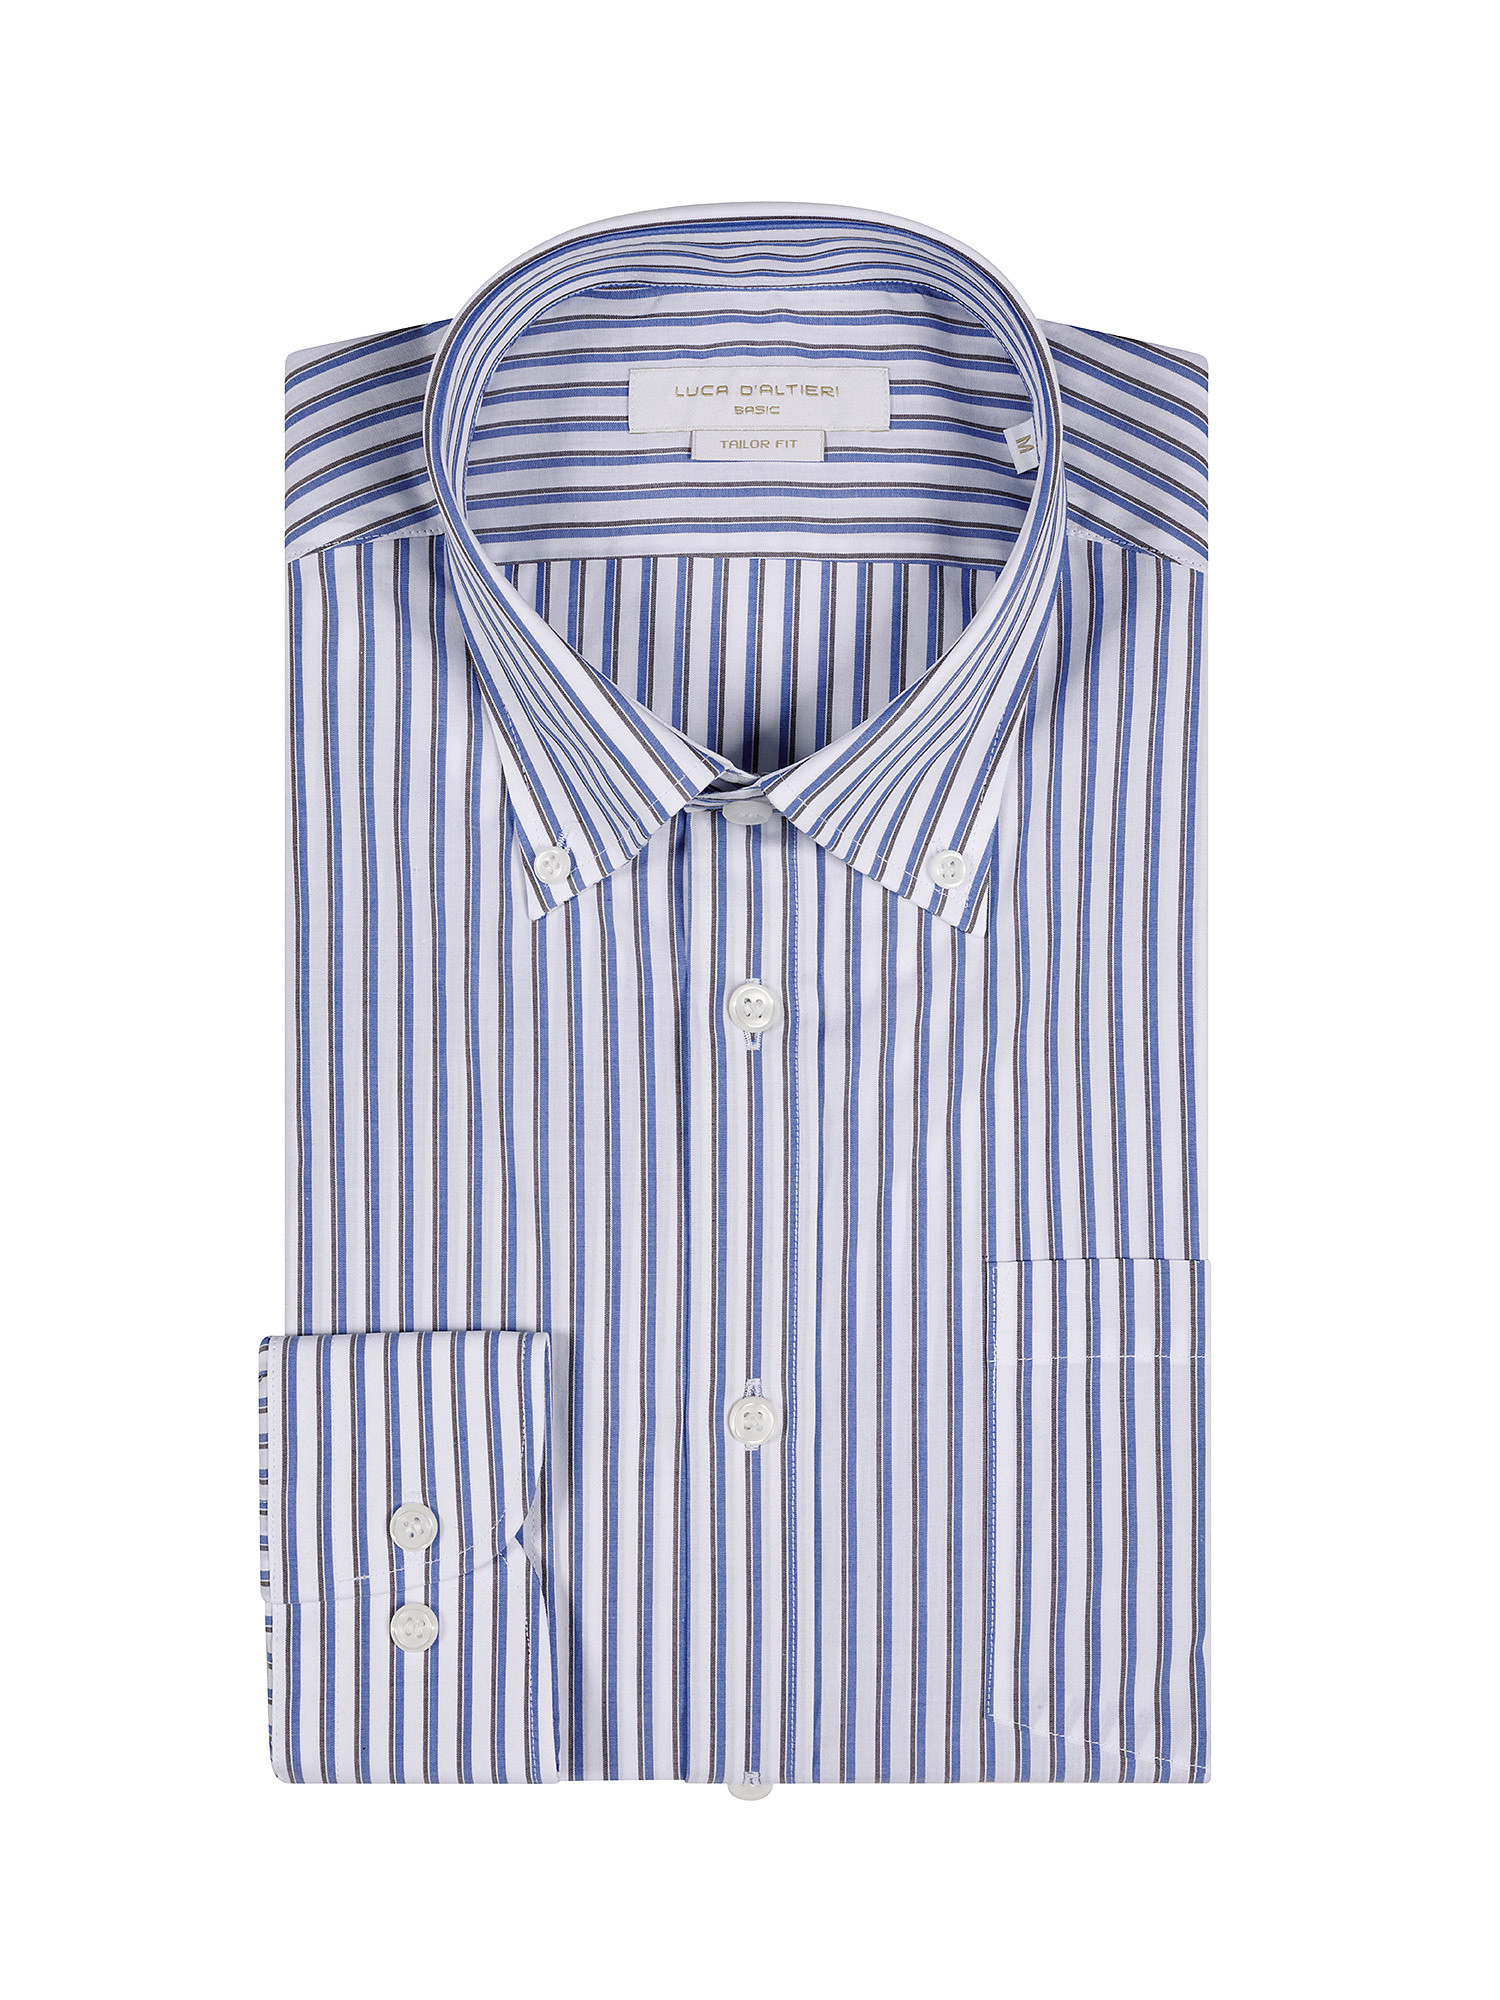 Tailor fit shirt in striped poplin cotton, Multicolor, large image number 2